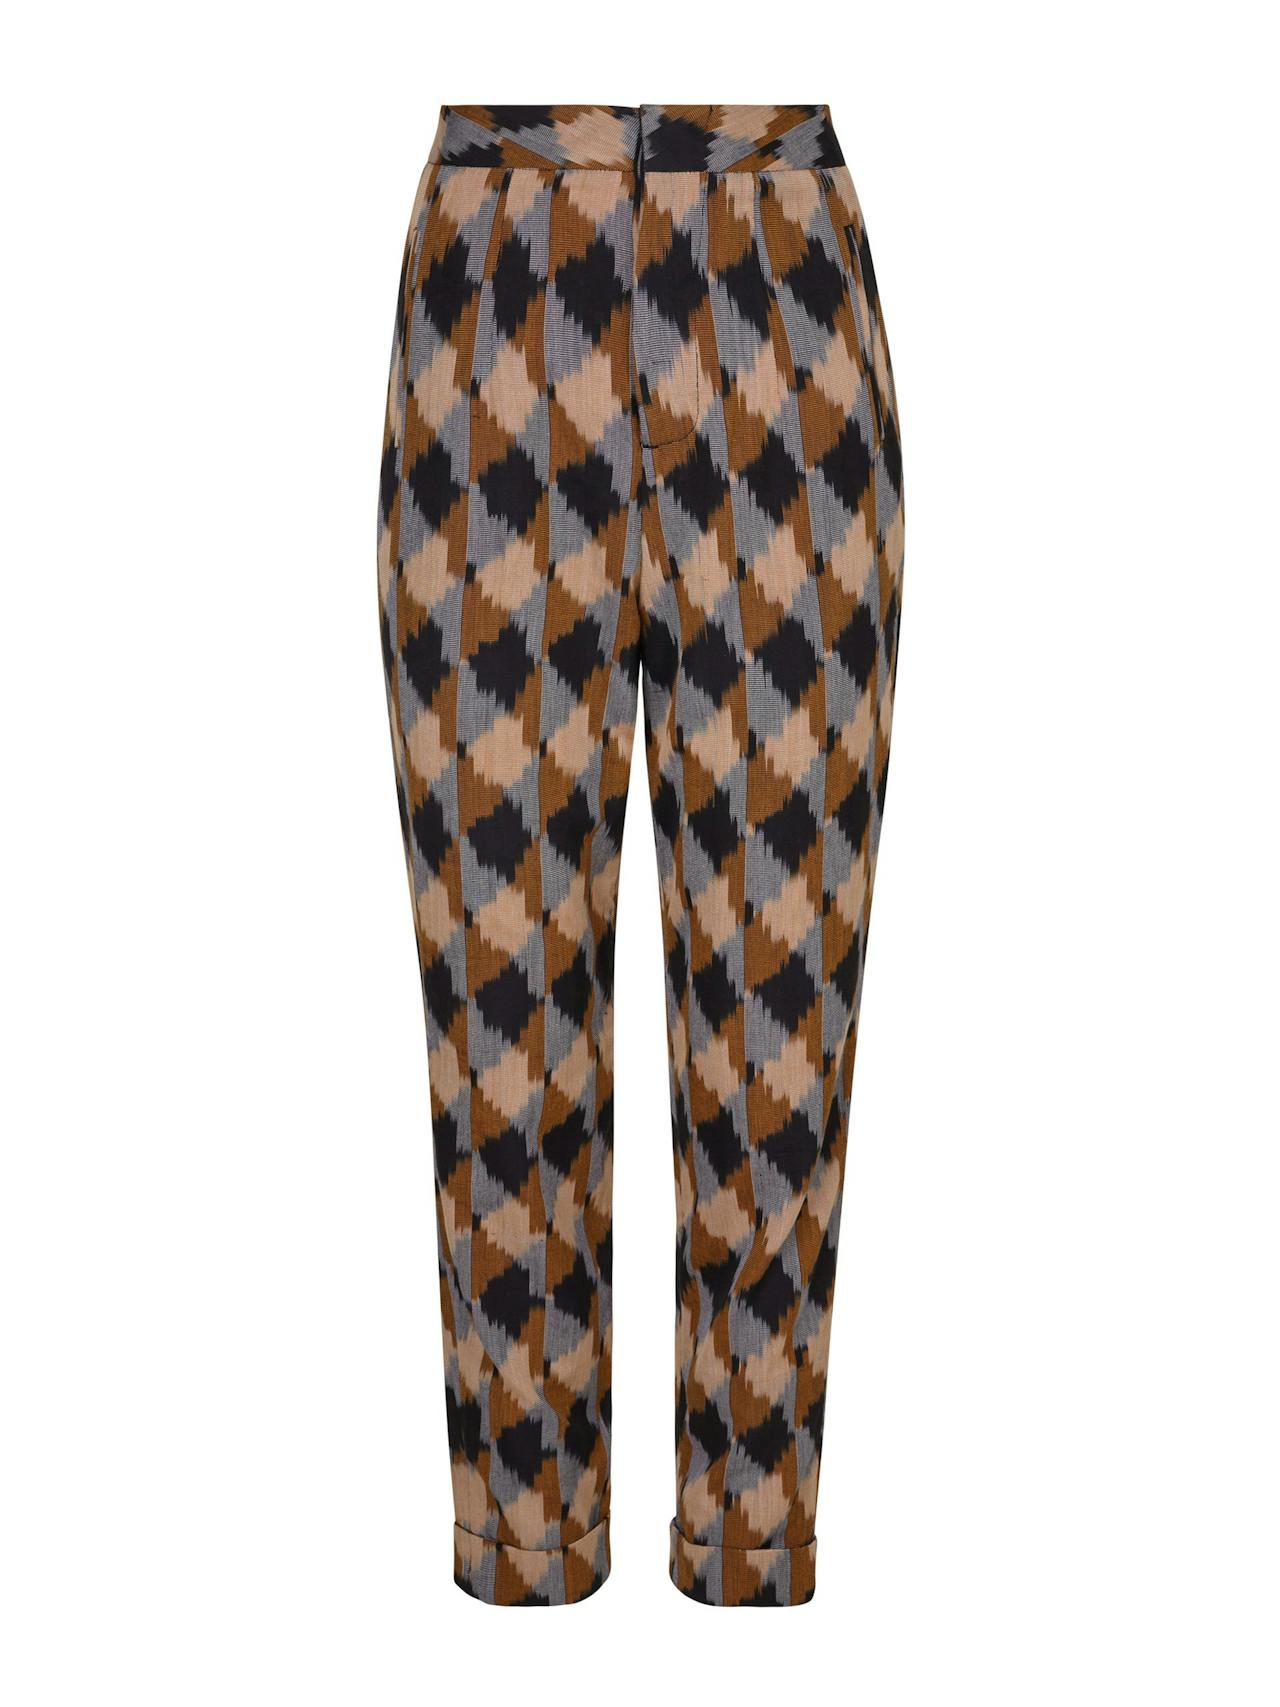 Brown cotton mulberry silk Ikat trousers